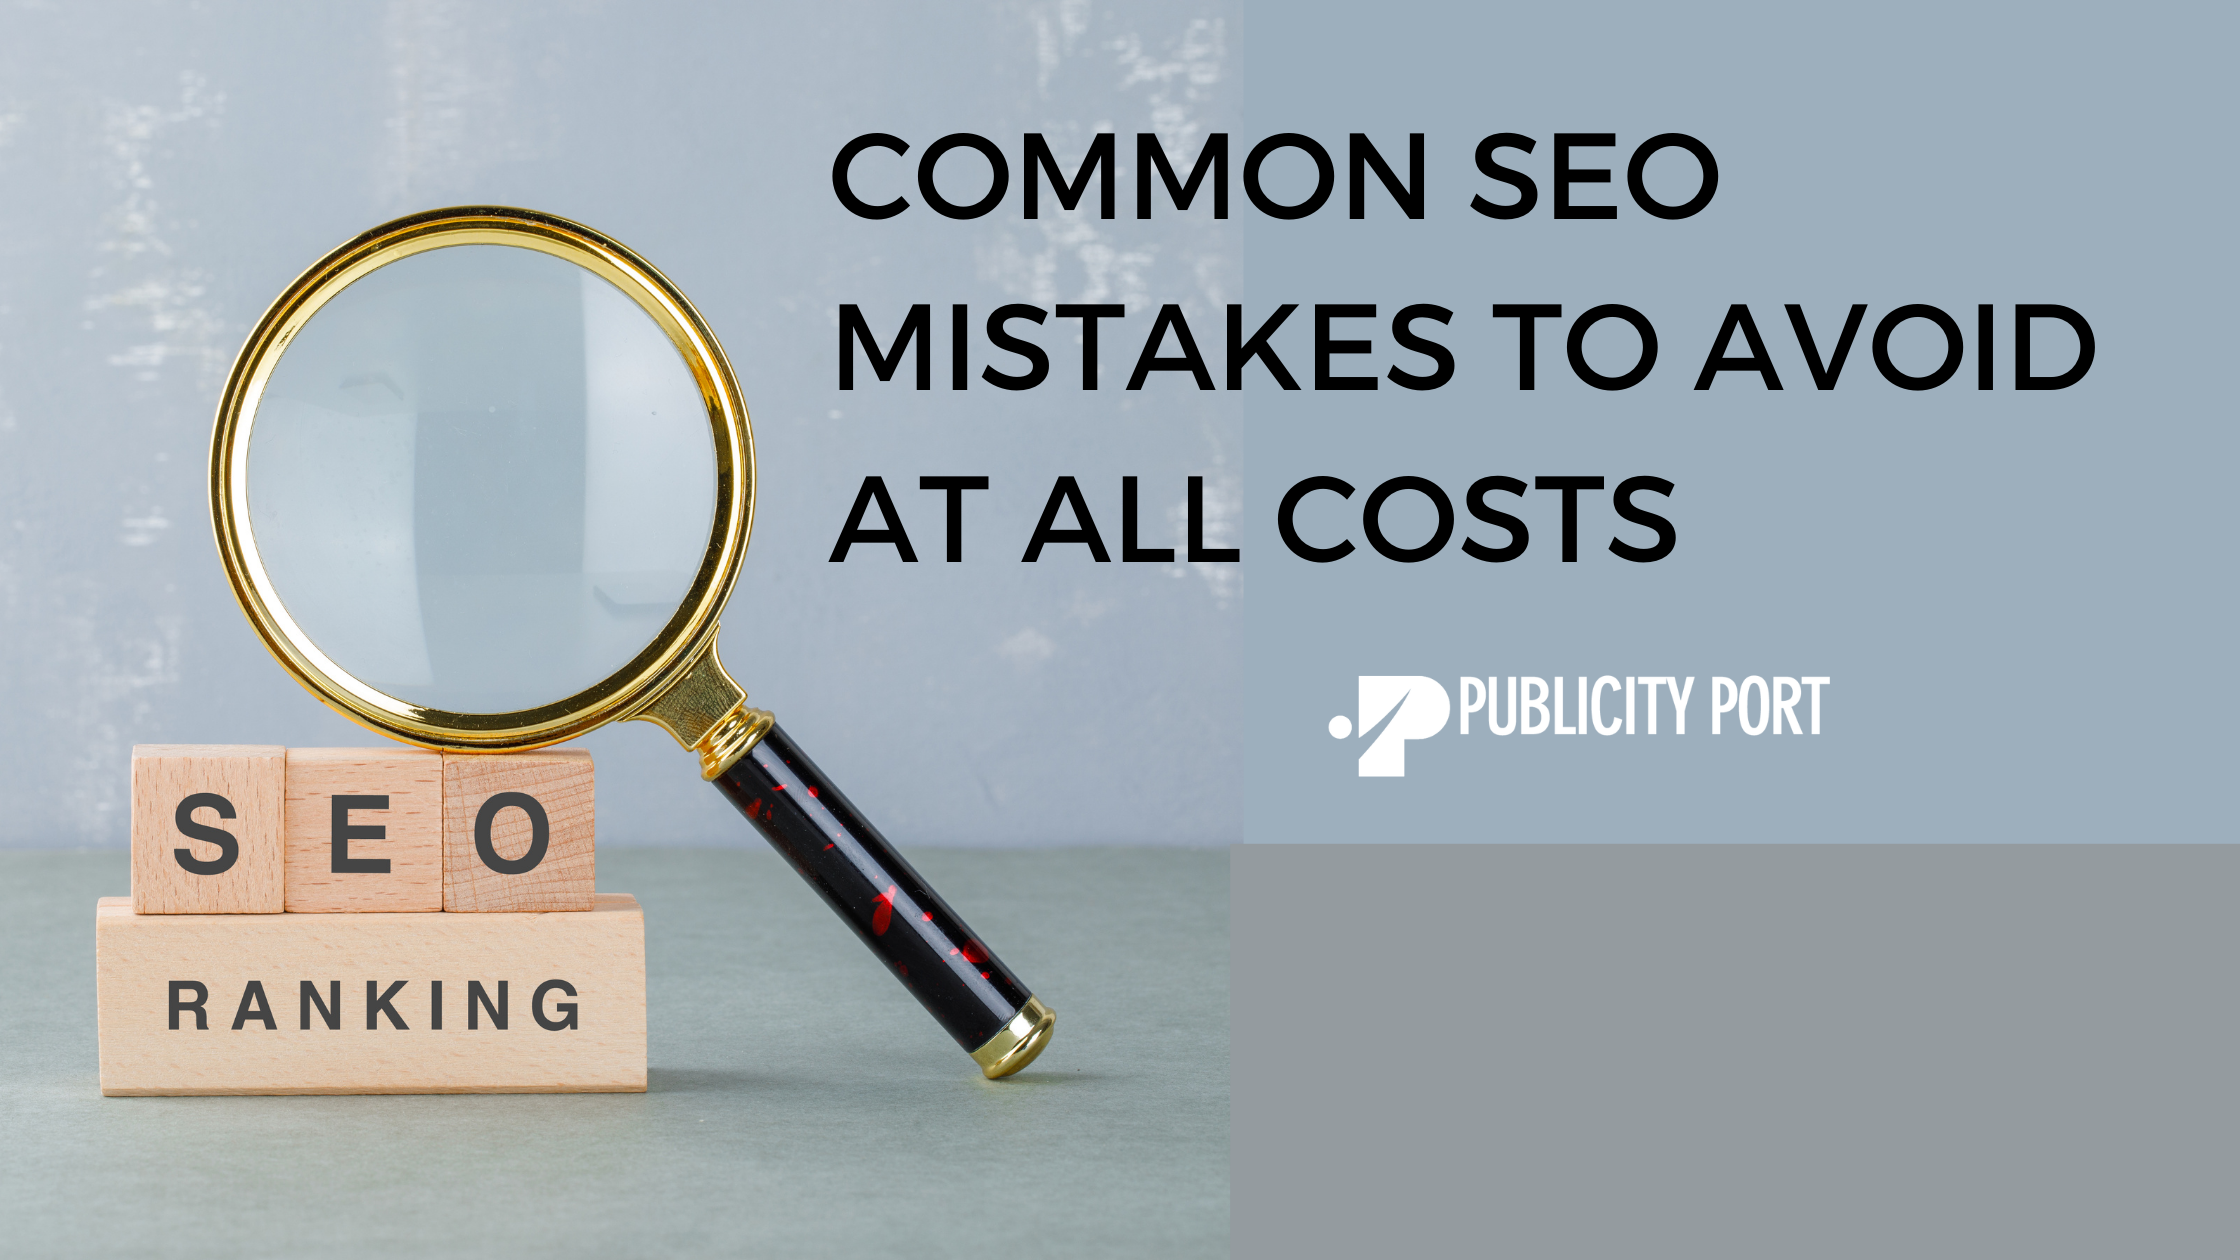 Common SEO Mistakes to Avoid at All Costs